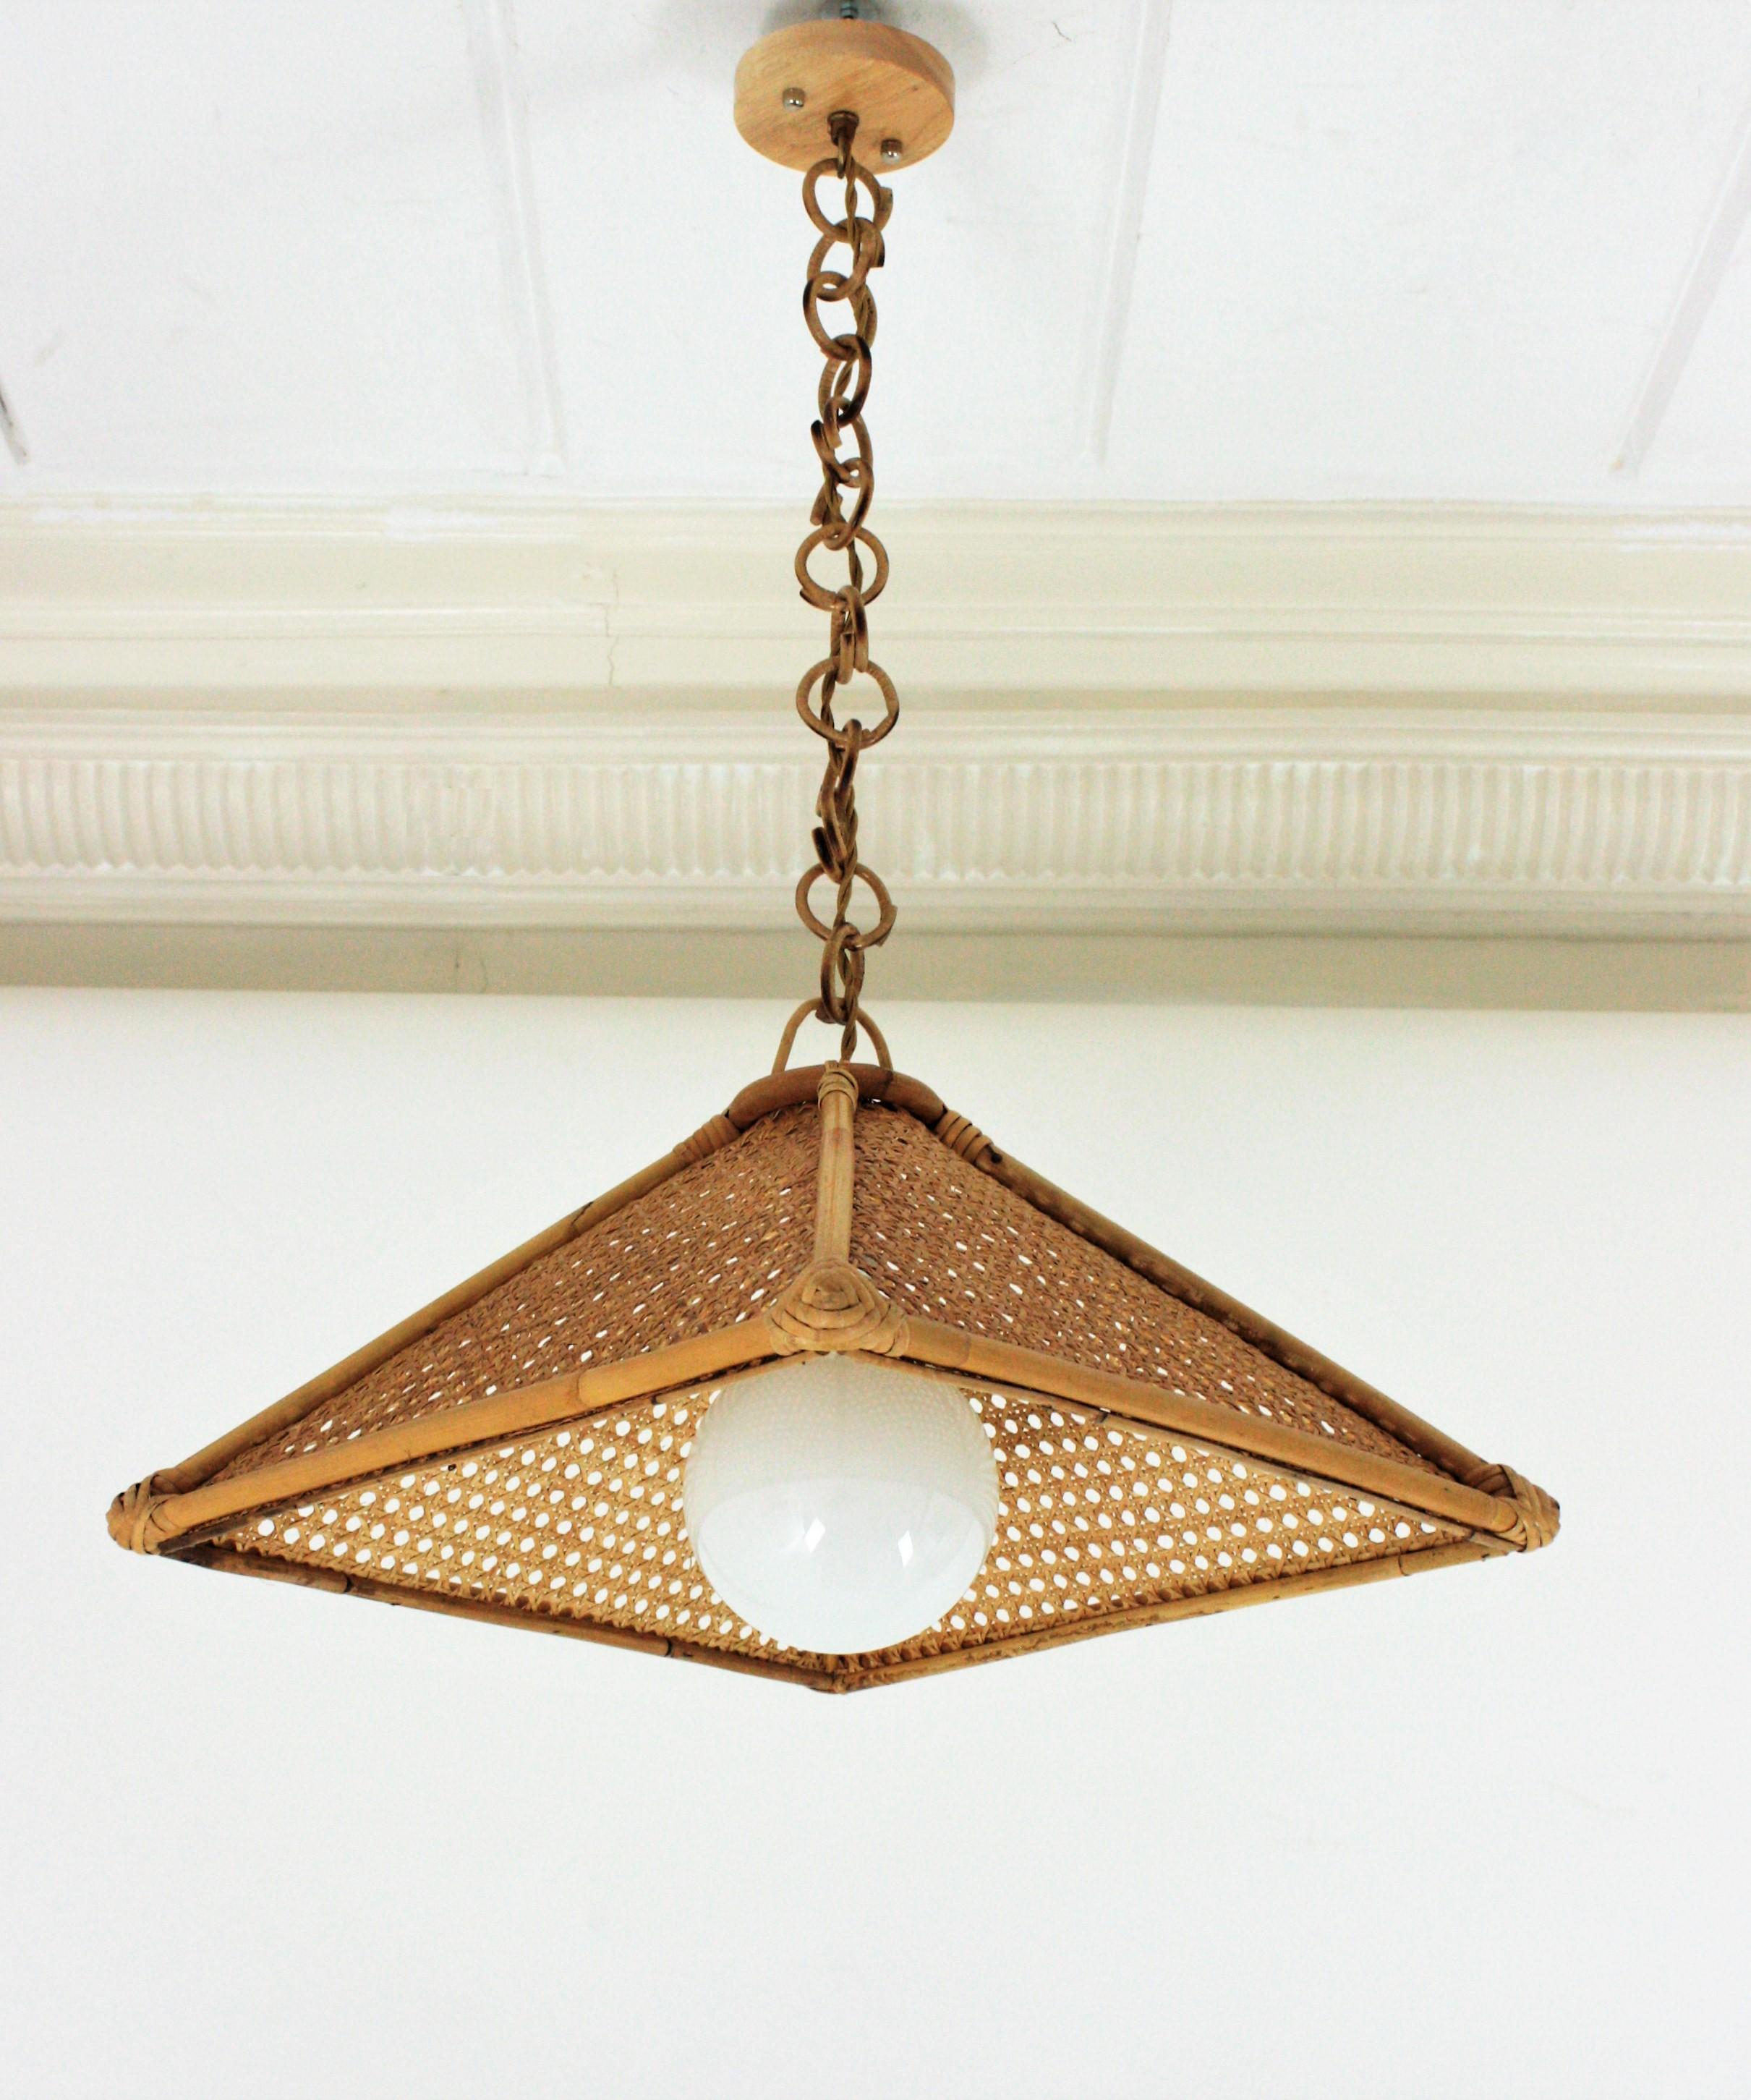 Mid-Century Modern Woven Cannage and Rattan Pendant Lamp / Chandelier. Spain, 1960s
This beautiful suspension lamp features a trapezoid rattan structure with wicker wire panels. It hangs from a chain with round rattan links topped by a wooden